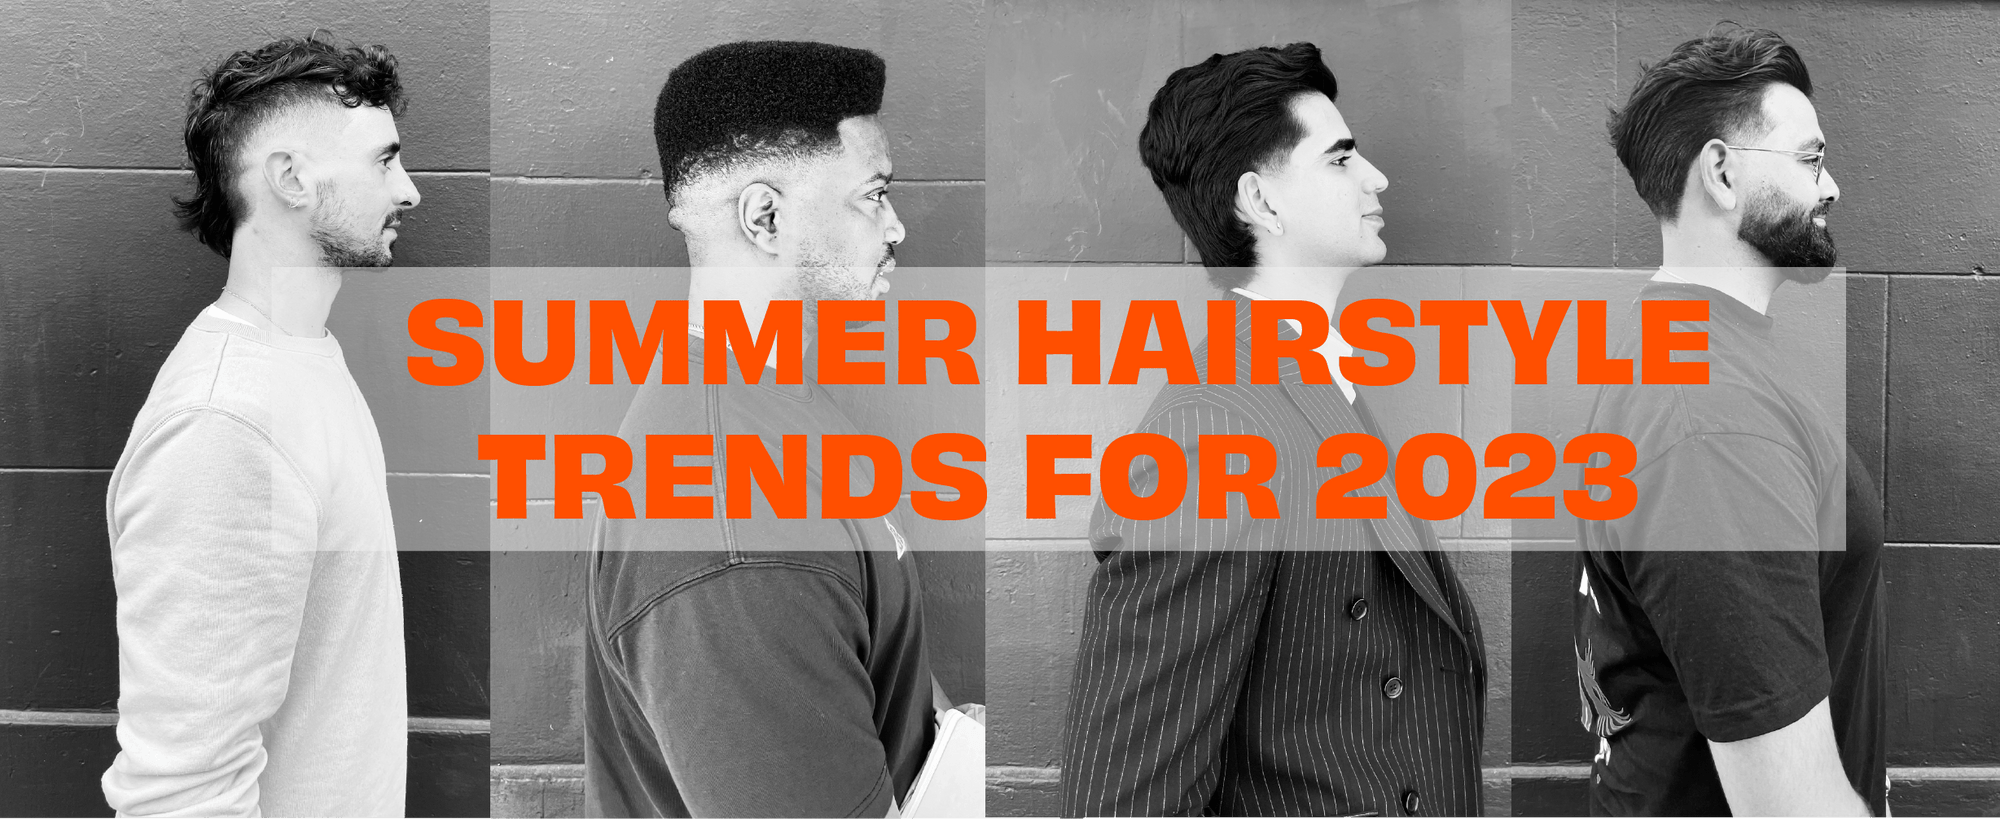 Haircut Inspiration - Best Grooming Guide for Men | Haircuts for men, Men's  long hairstyles, Mens hairstyles